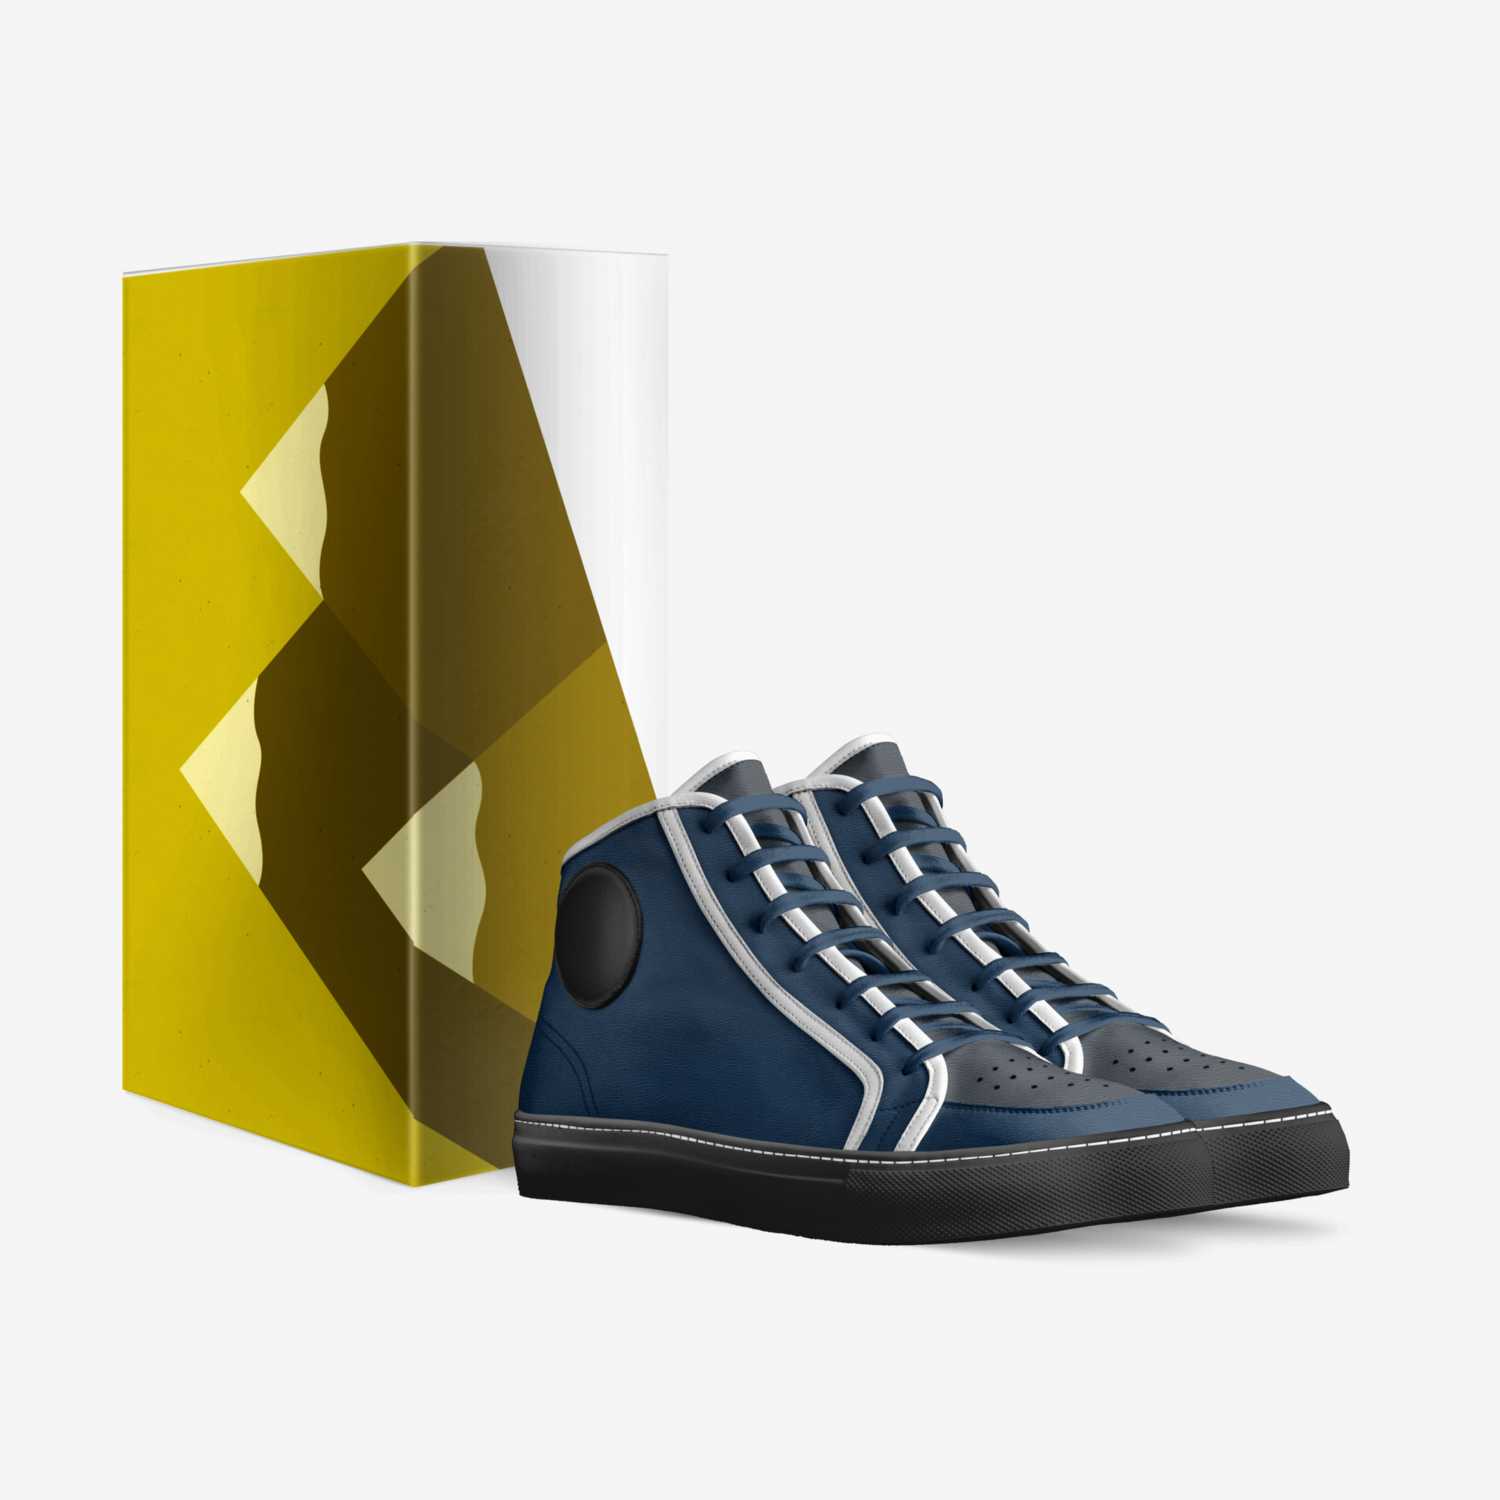 LB1 custom made in Italy shoes by Luke Boehm | Box view